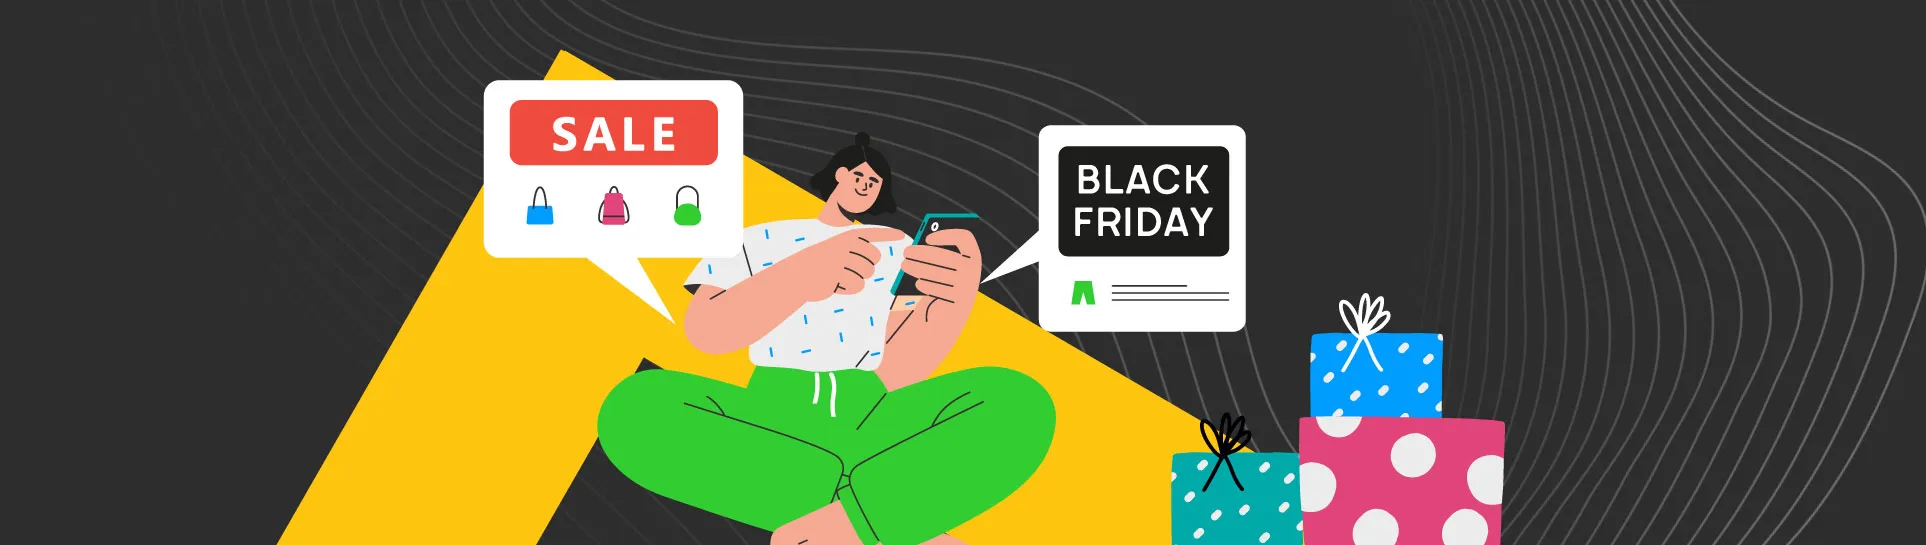 Stores, Sites and Black Friday Sales – Why Black Friday might not be plain Sale-ing.